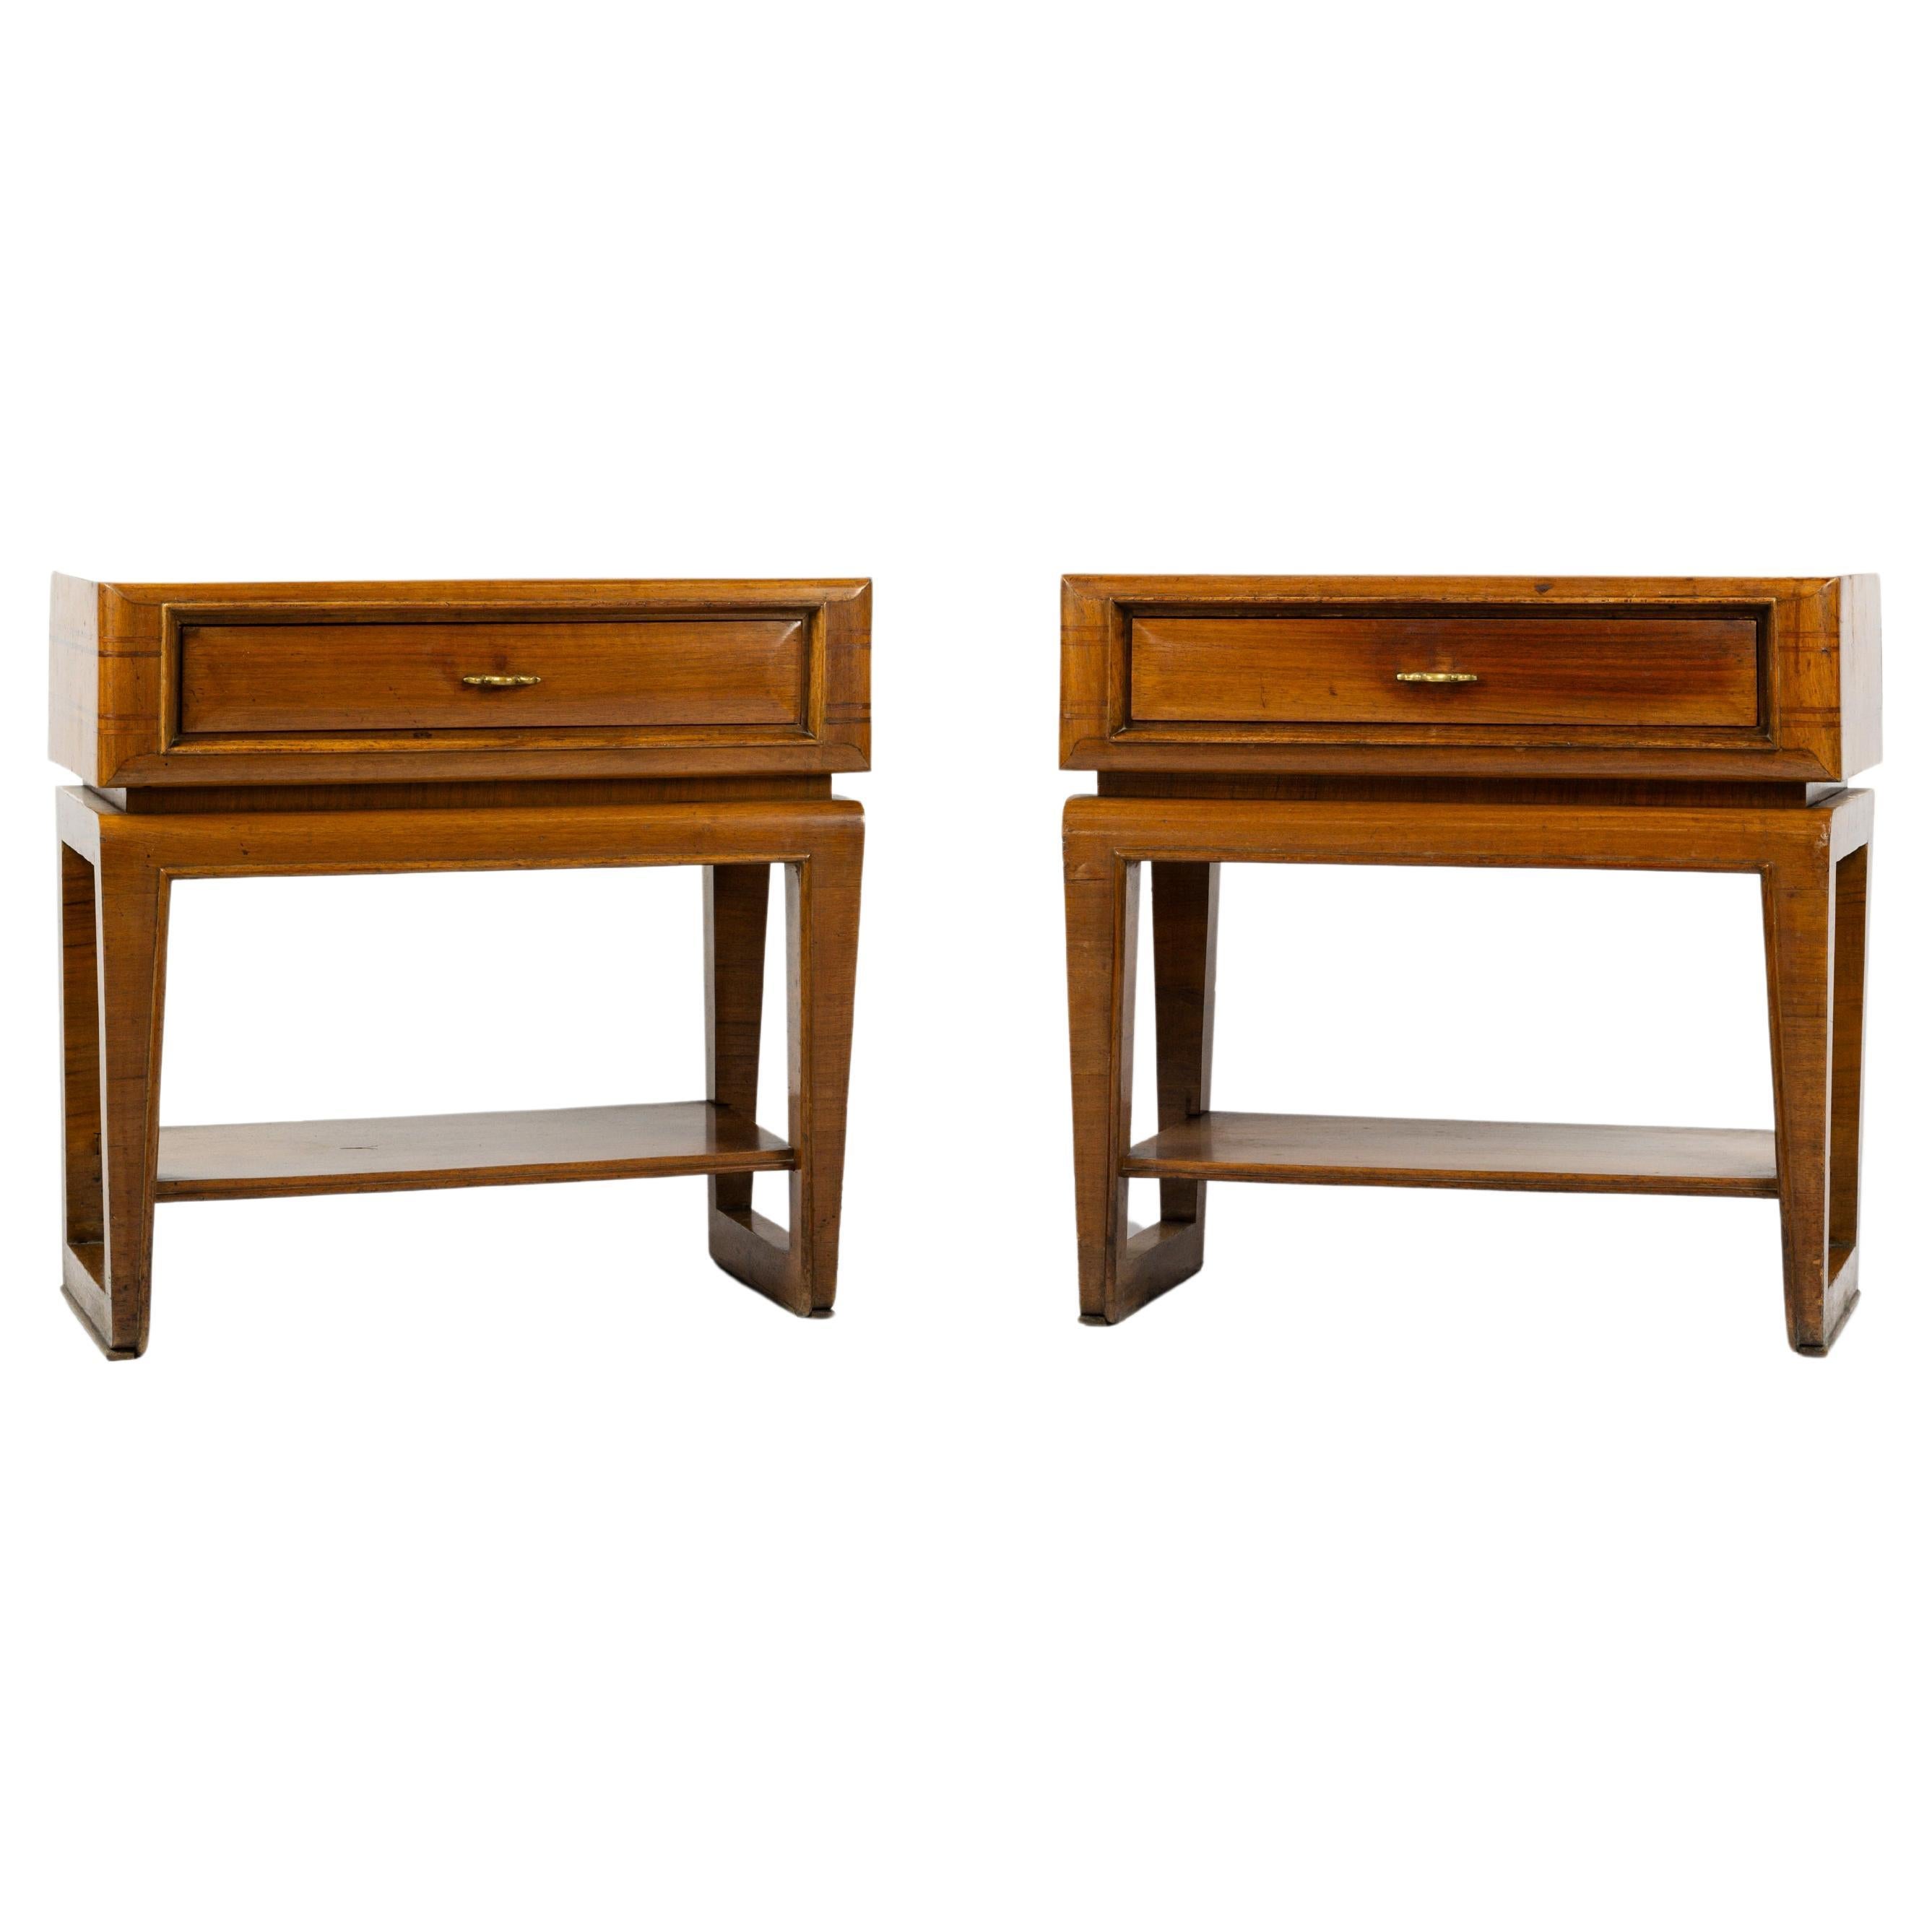 Pair of walnut wood night stands attributed to Paolo Buffa